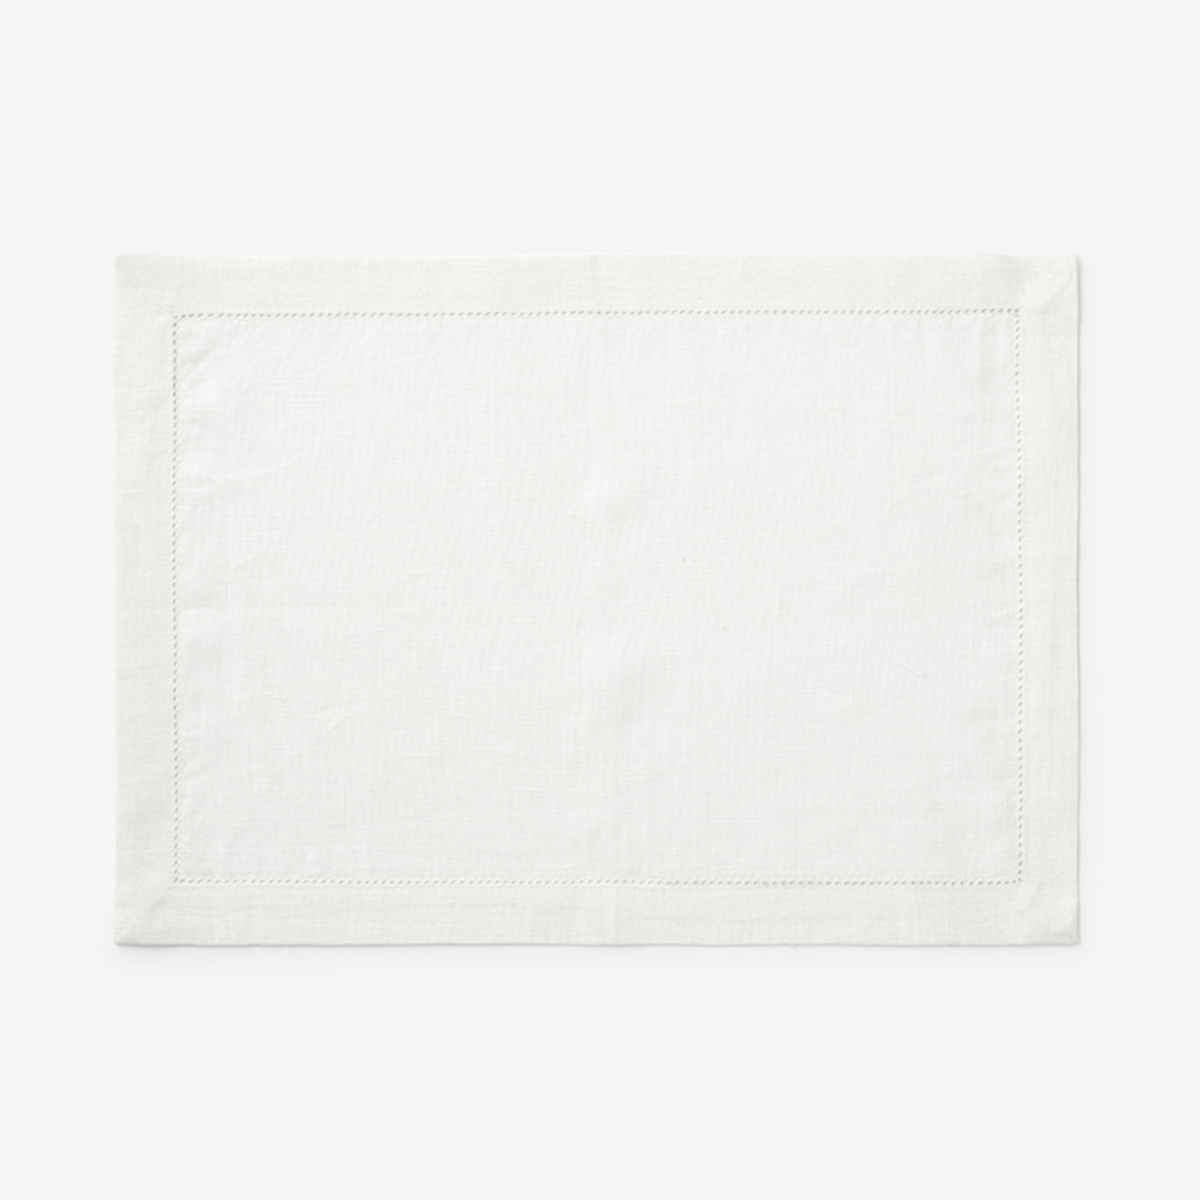 https://companystore-res.cloudinary.com/image/upload/f_auto,q_40,dpr_3.0/w_400,c_scale/webimages/80018c_linen_placemats_offwhite_main?_s=RAABAB0